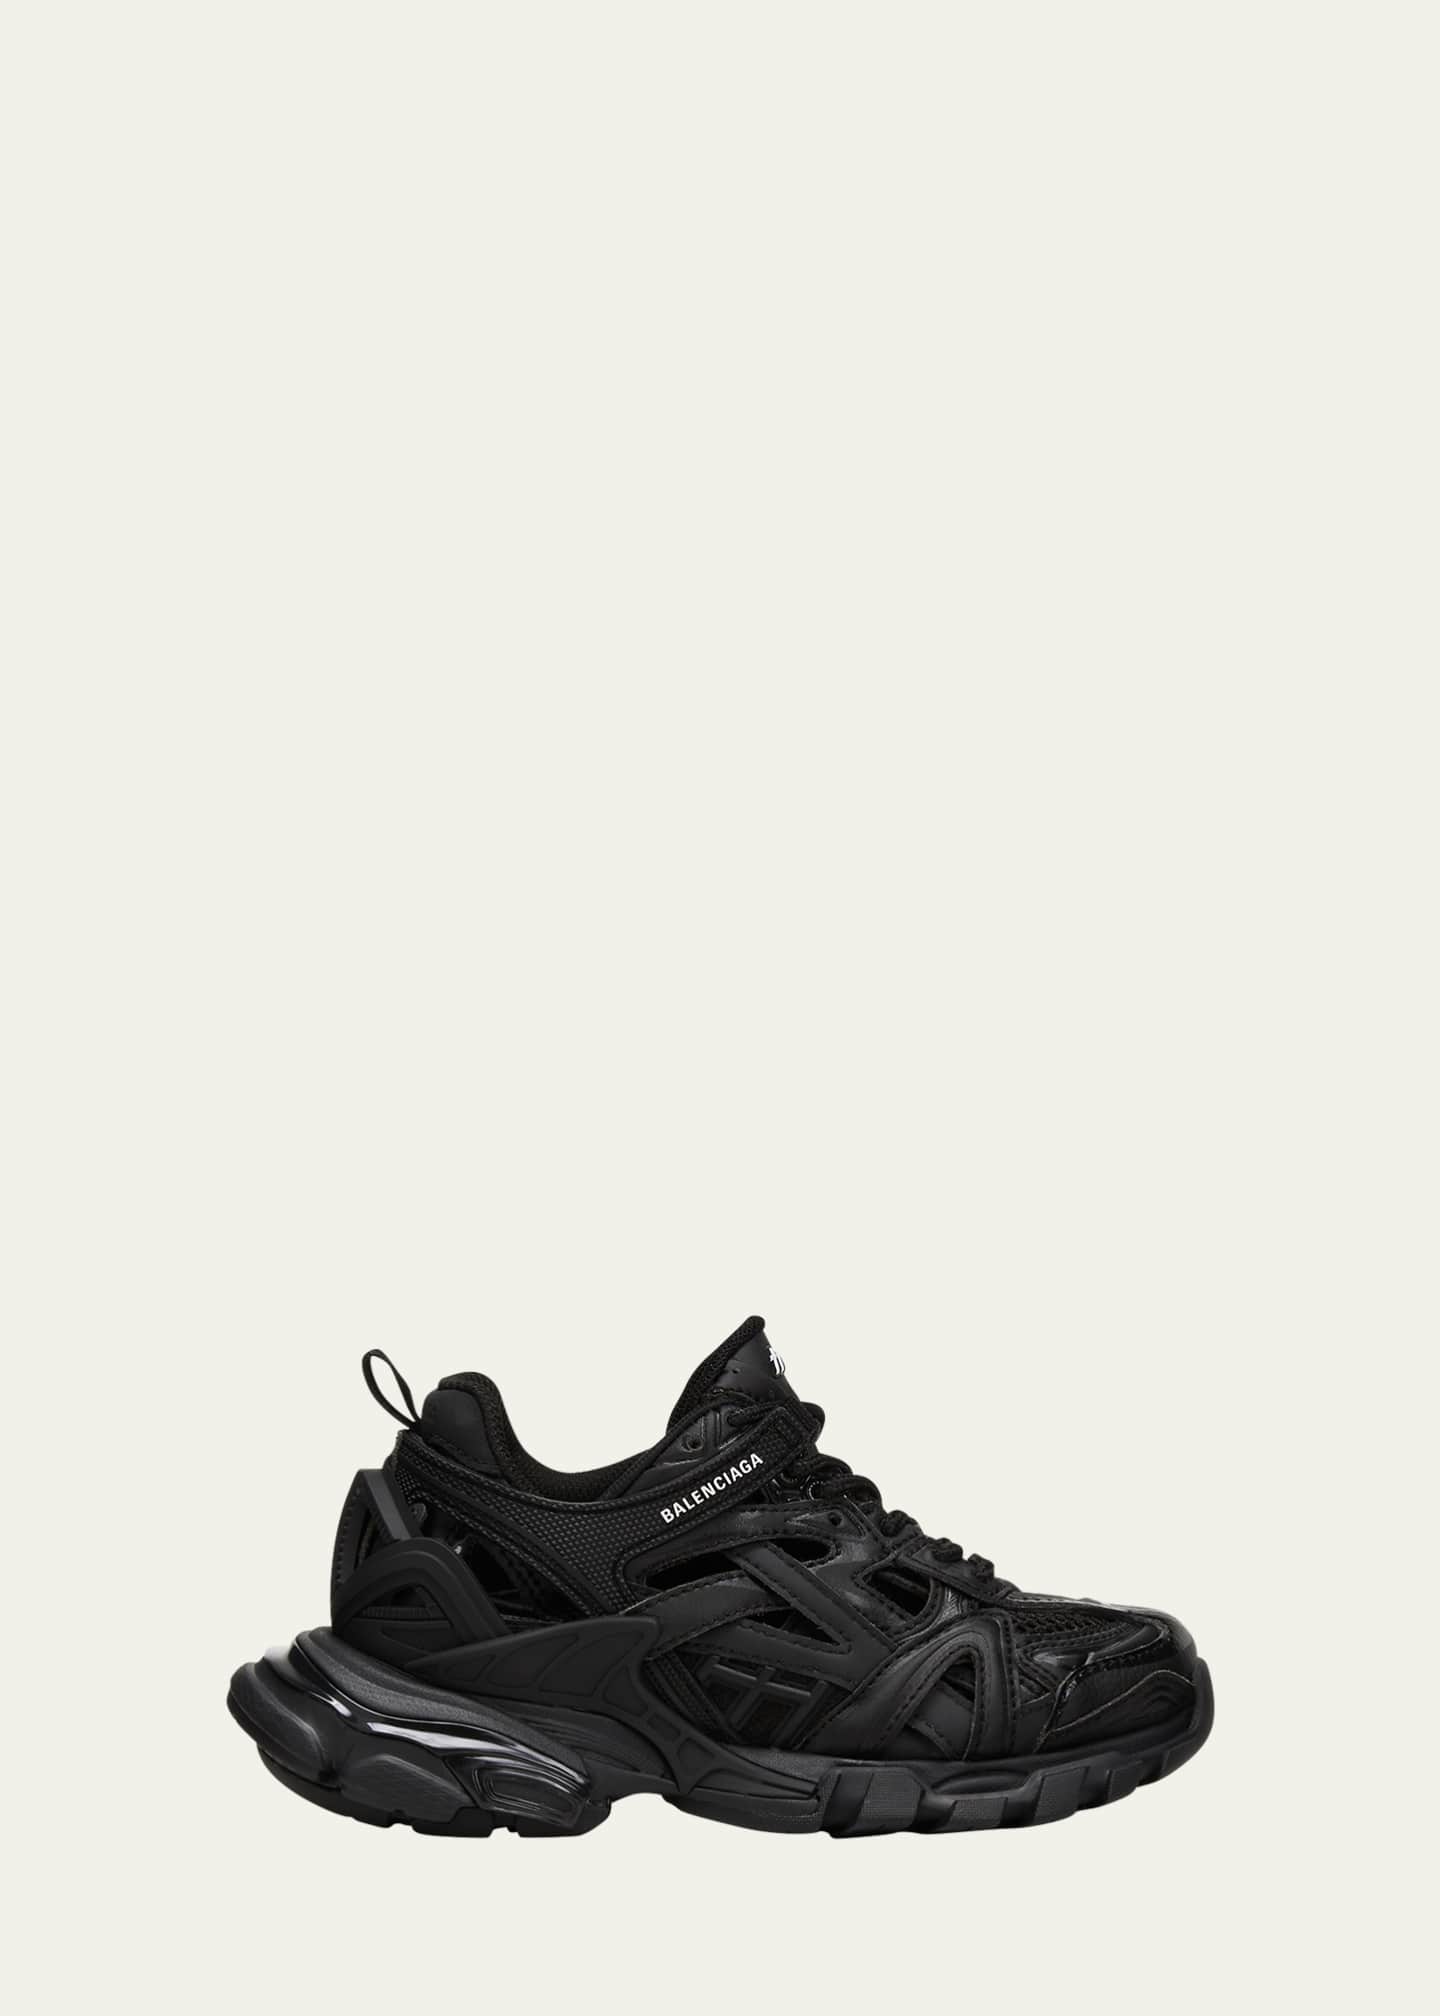 smugling ost Ugyldigt Balenciaga Kid's Track 2 Caged Trainer Sneakers, Baby/Toddler/Kids -  Bergdorf Goodman